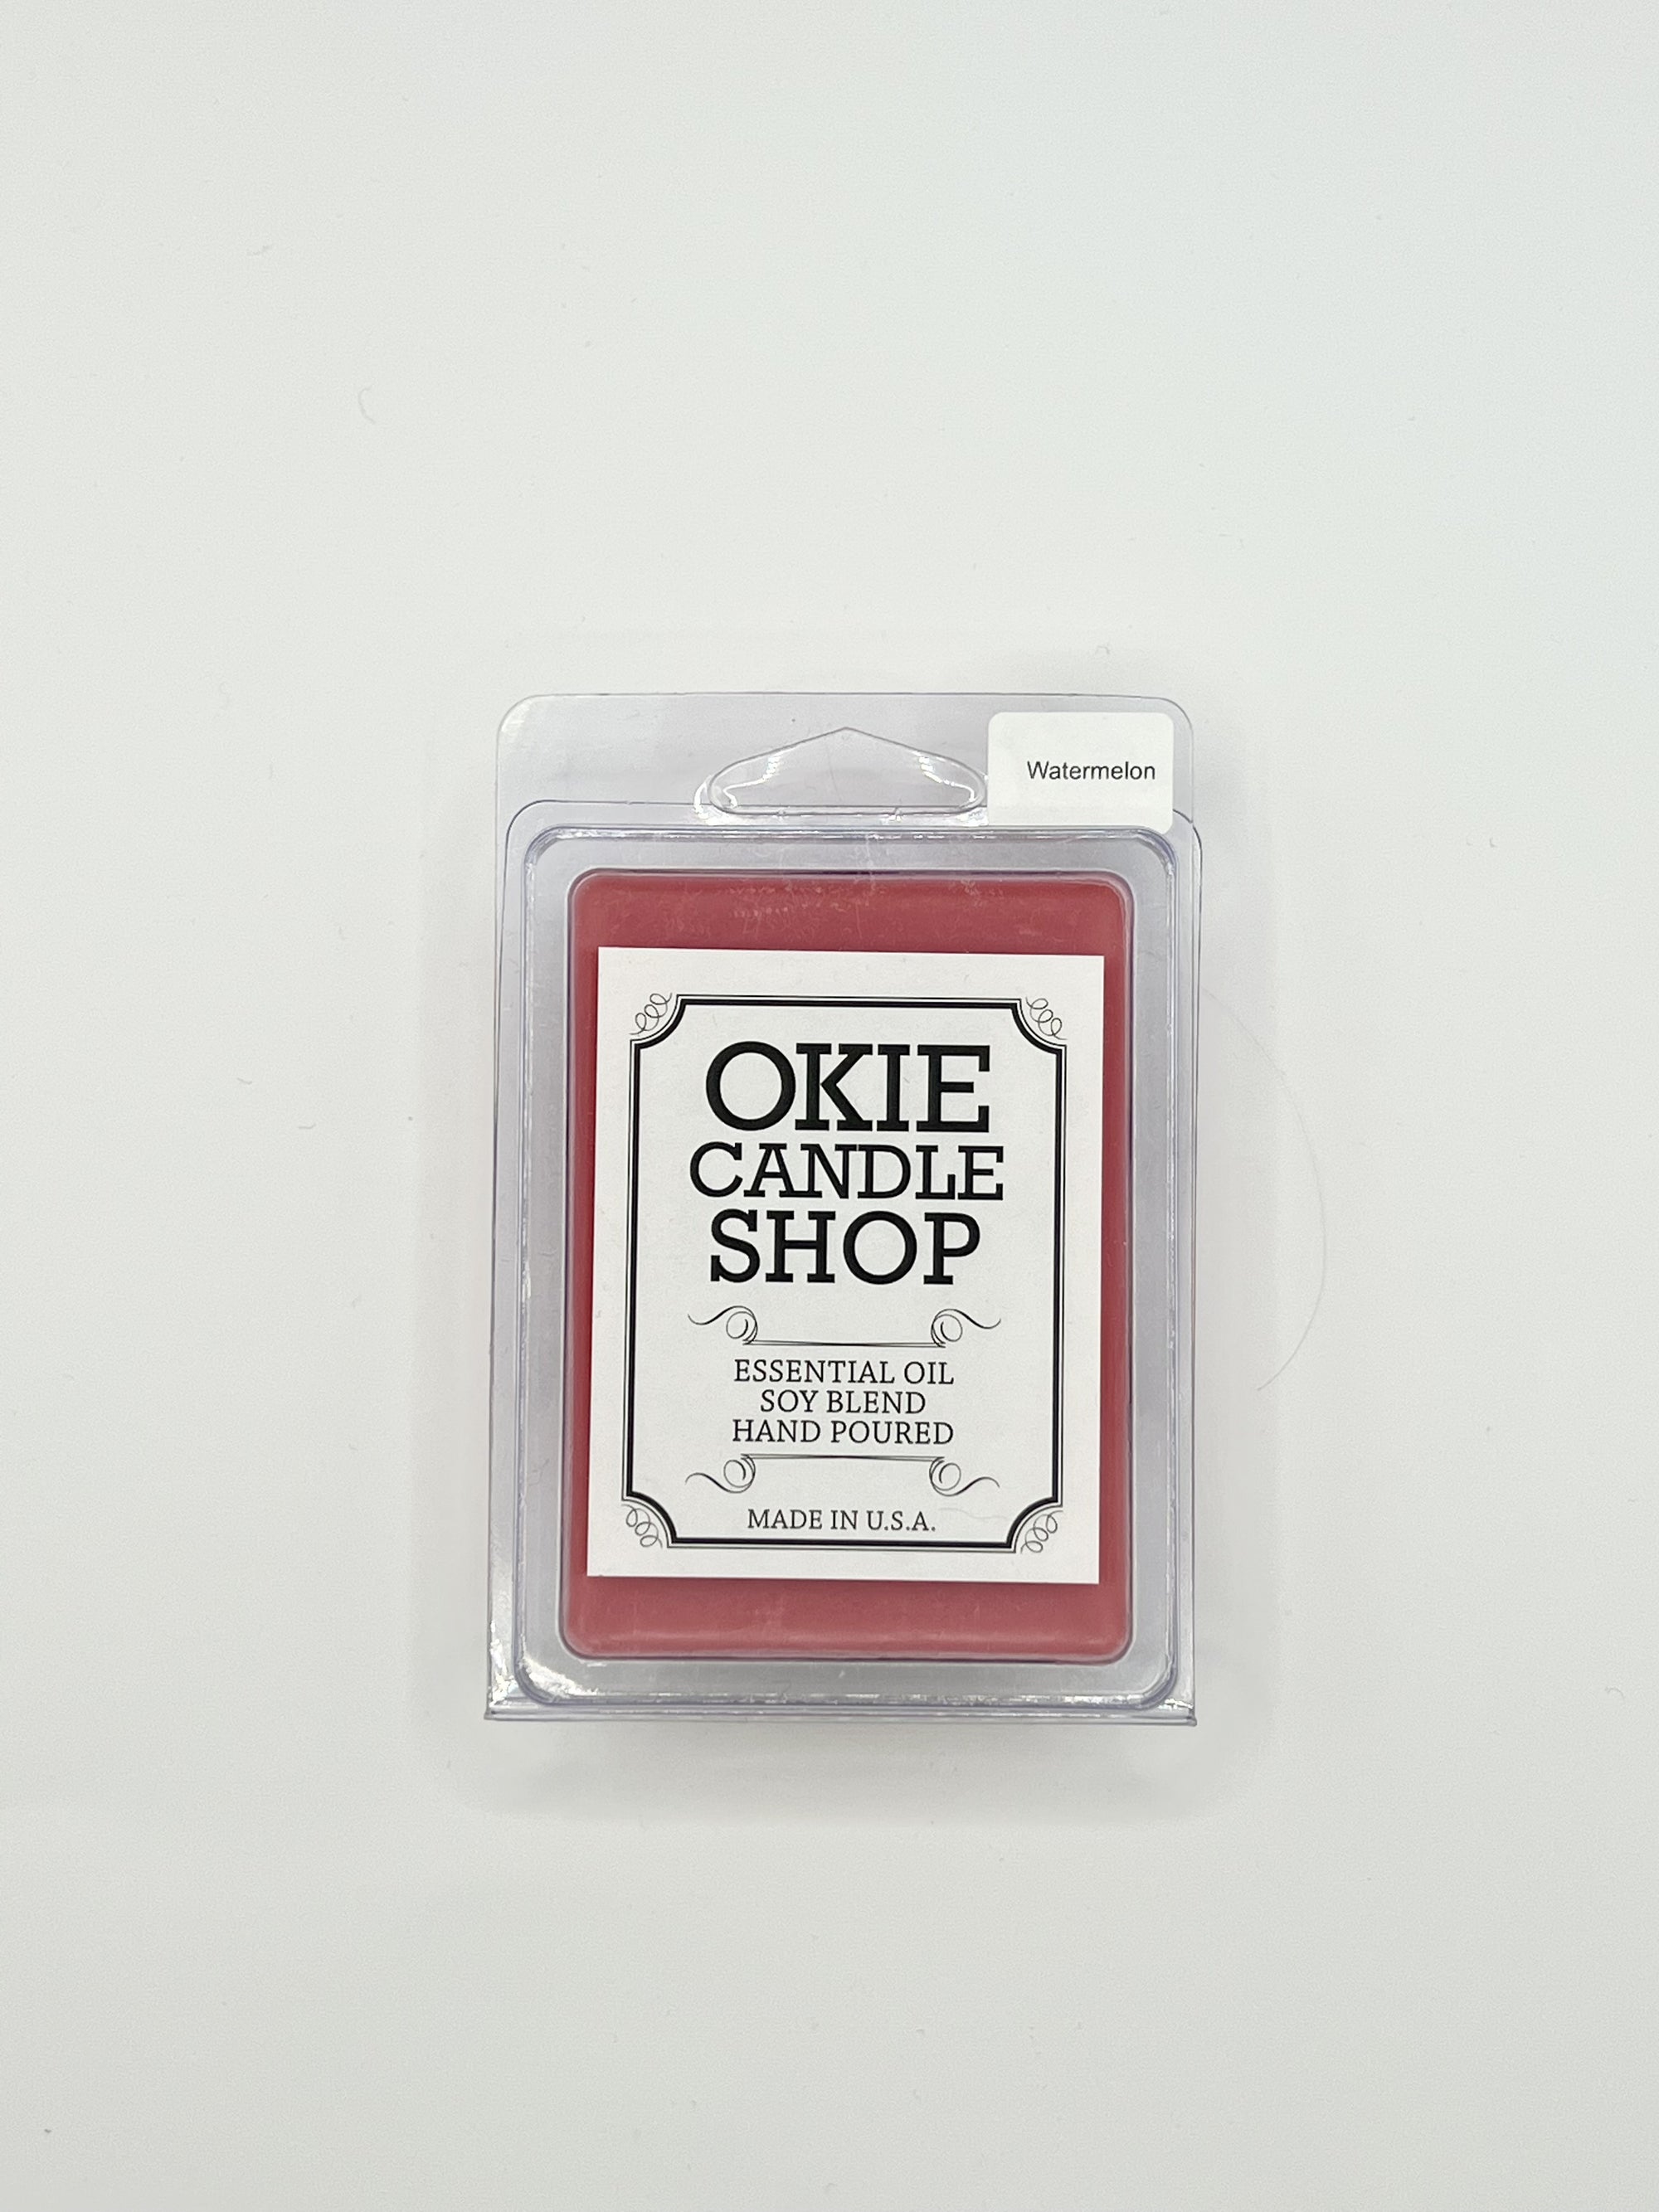 Okie Candle Watermelon - Wax Melts